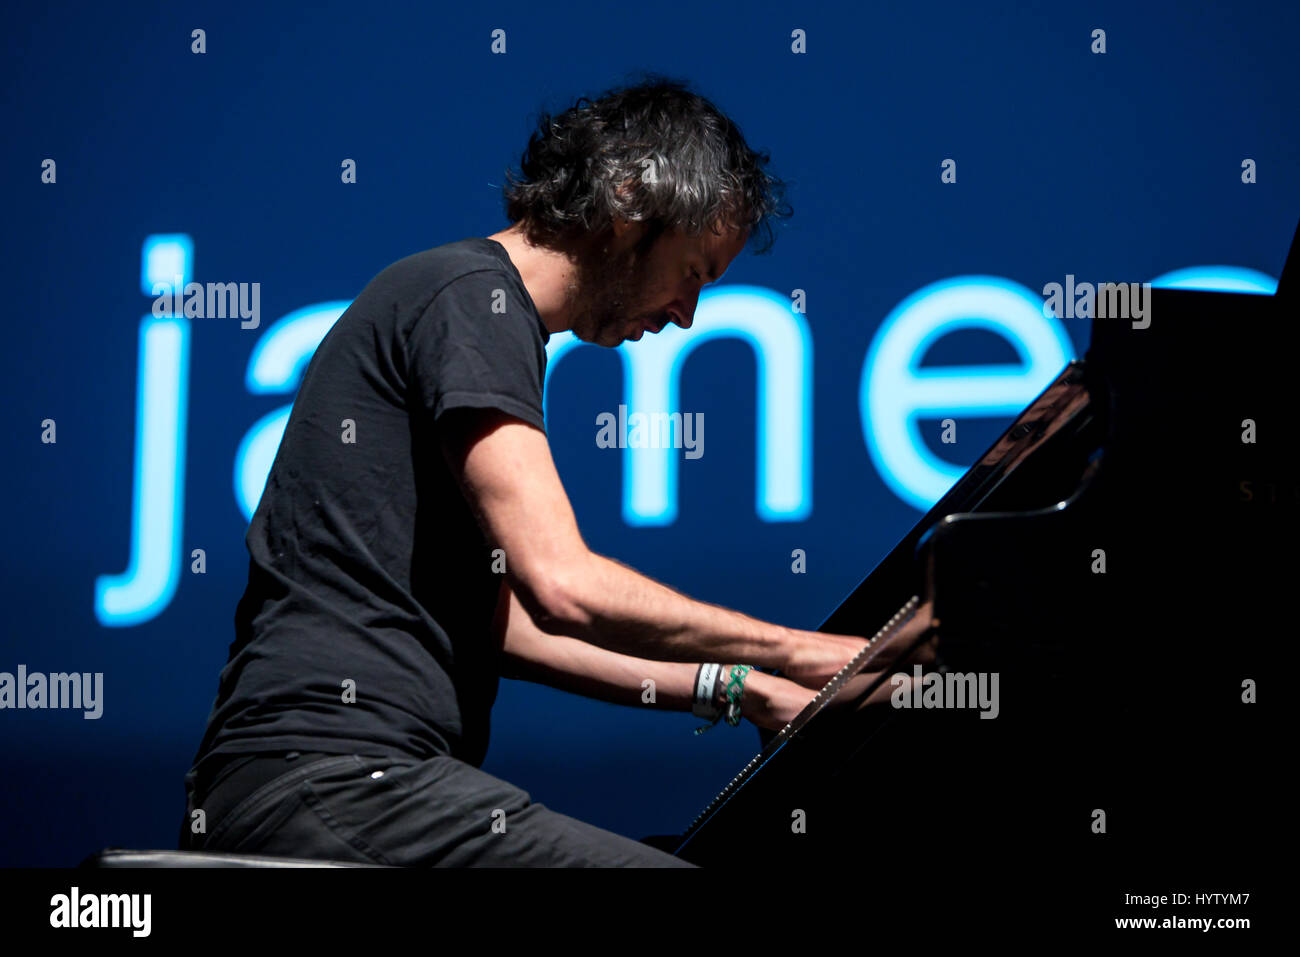 BARCELONA - JUN 16: James Rhodes (pianist and writer) performs in concert at Sonar Festival on June 16, 2016 in Barcelona, Spain. Stock Photo